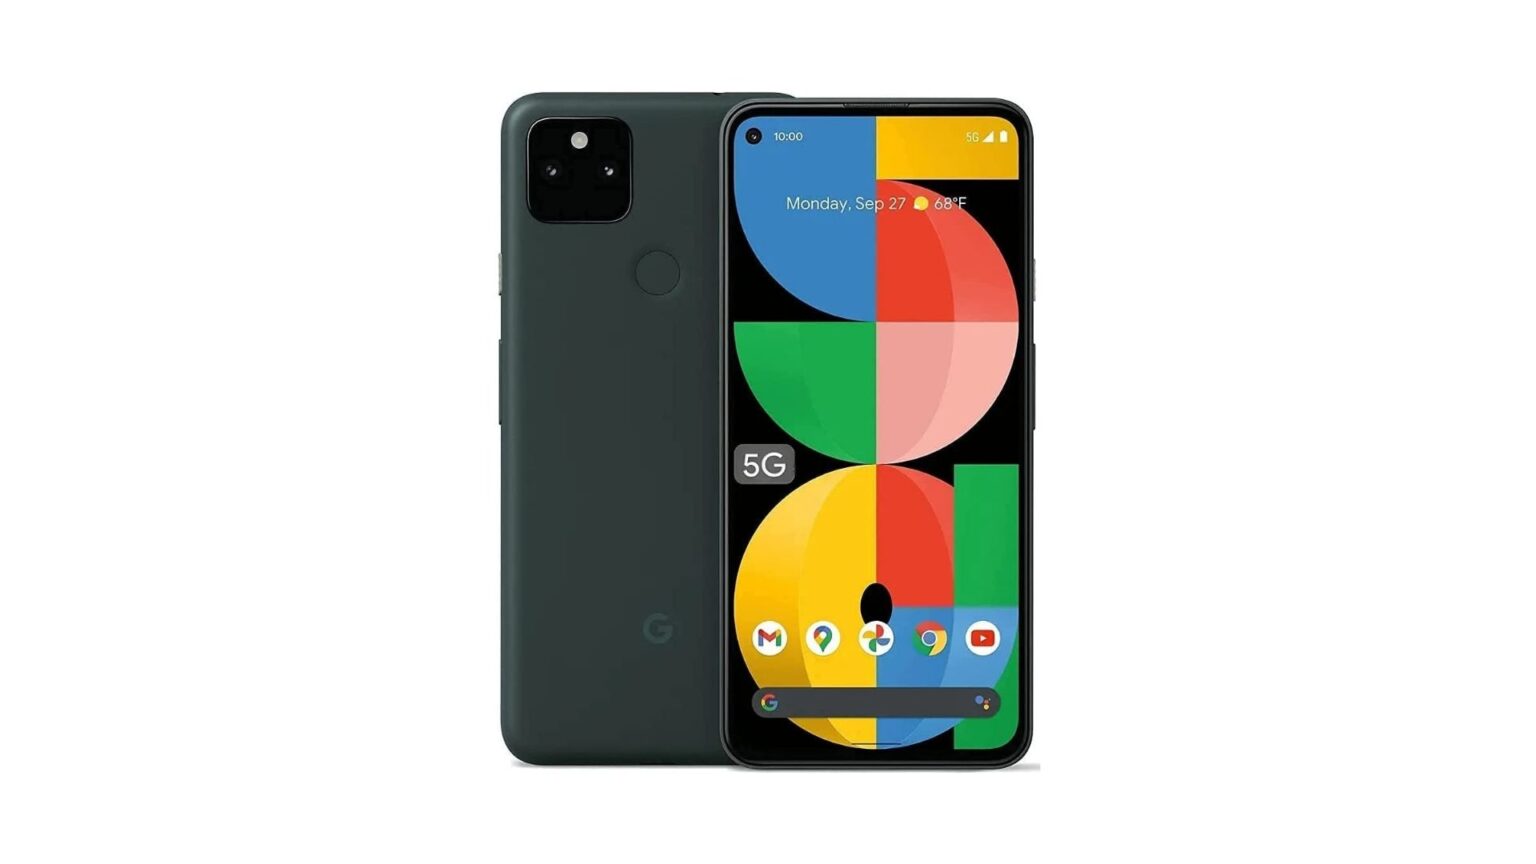 Google Pixel 5a buyer's guide: What you need to know - Android Authority